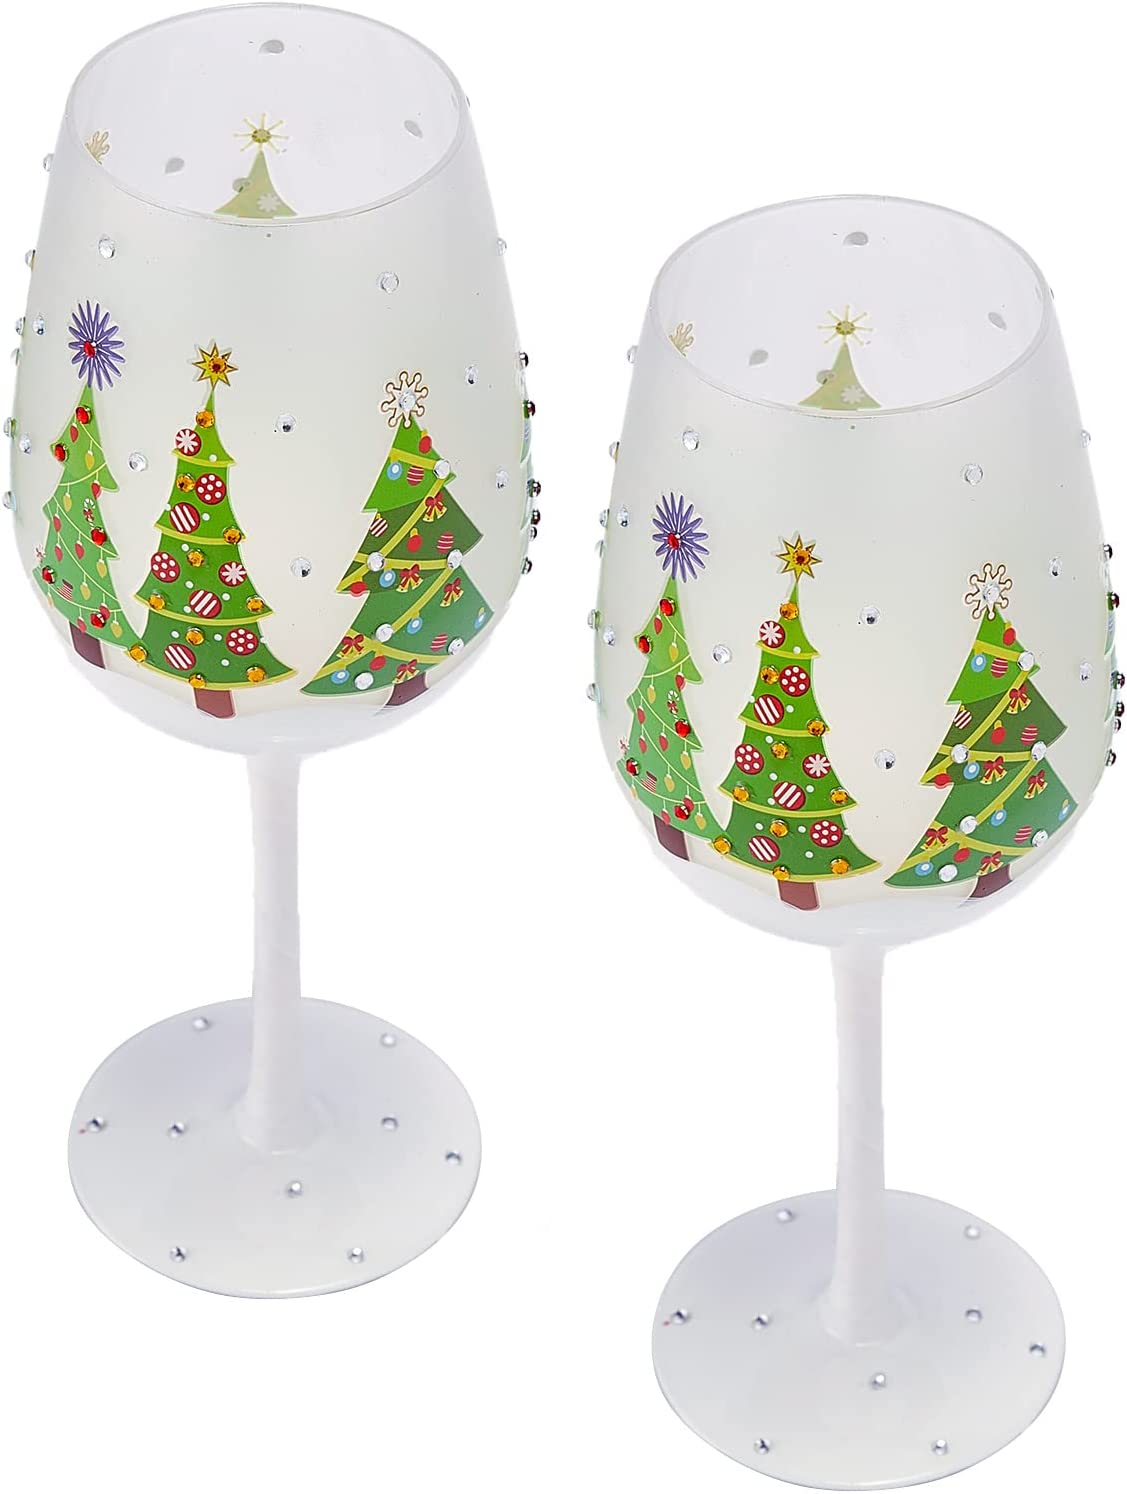 Set of 2 Stemmed Christmas Tree Design Wine Glasses - Hand Painted 14 oz Decorated Christmas Tree Glasses - Perfect for Wine, Champagne, Holiday Parties and Festivities - 8.75" High, 14 oz Capacity-3